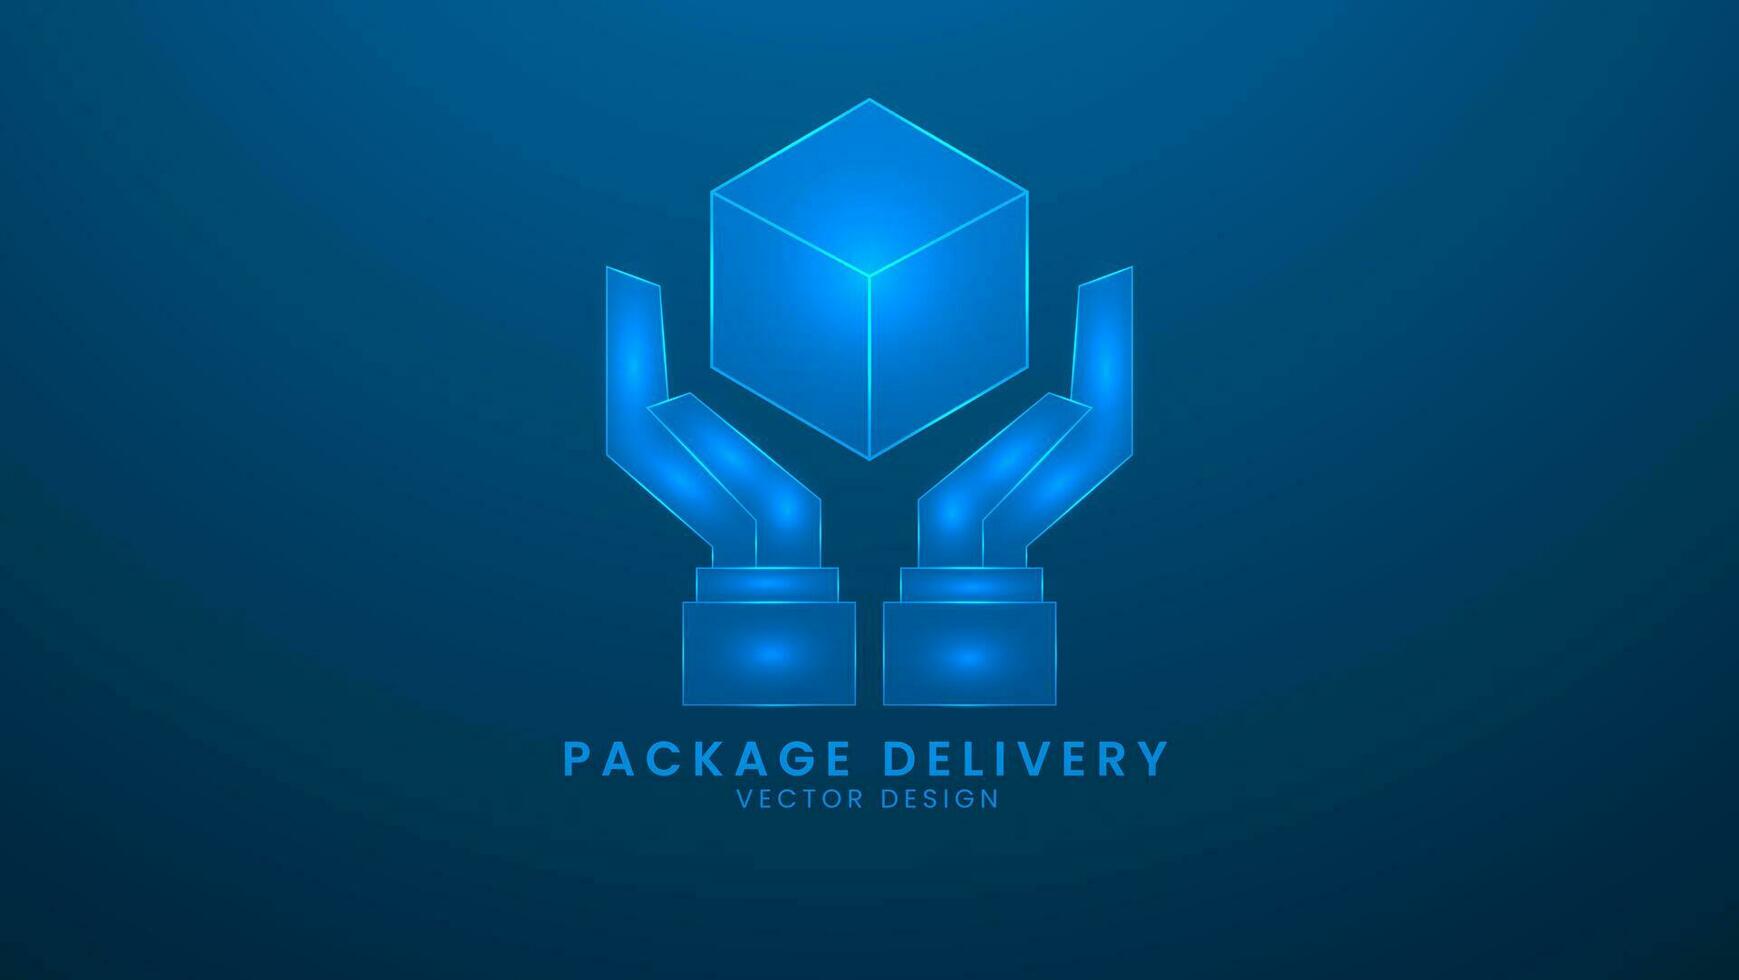 Delivery with a package box. Online delivery service concept. Vector illustration with light effect and neon